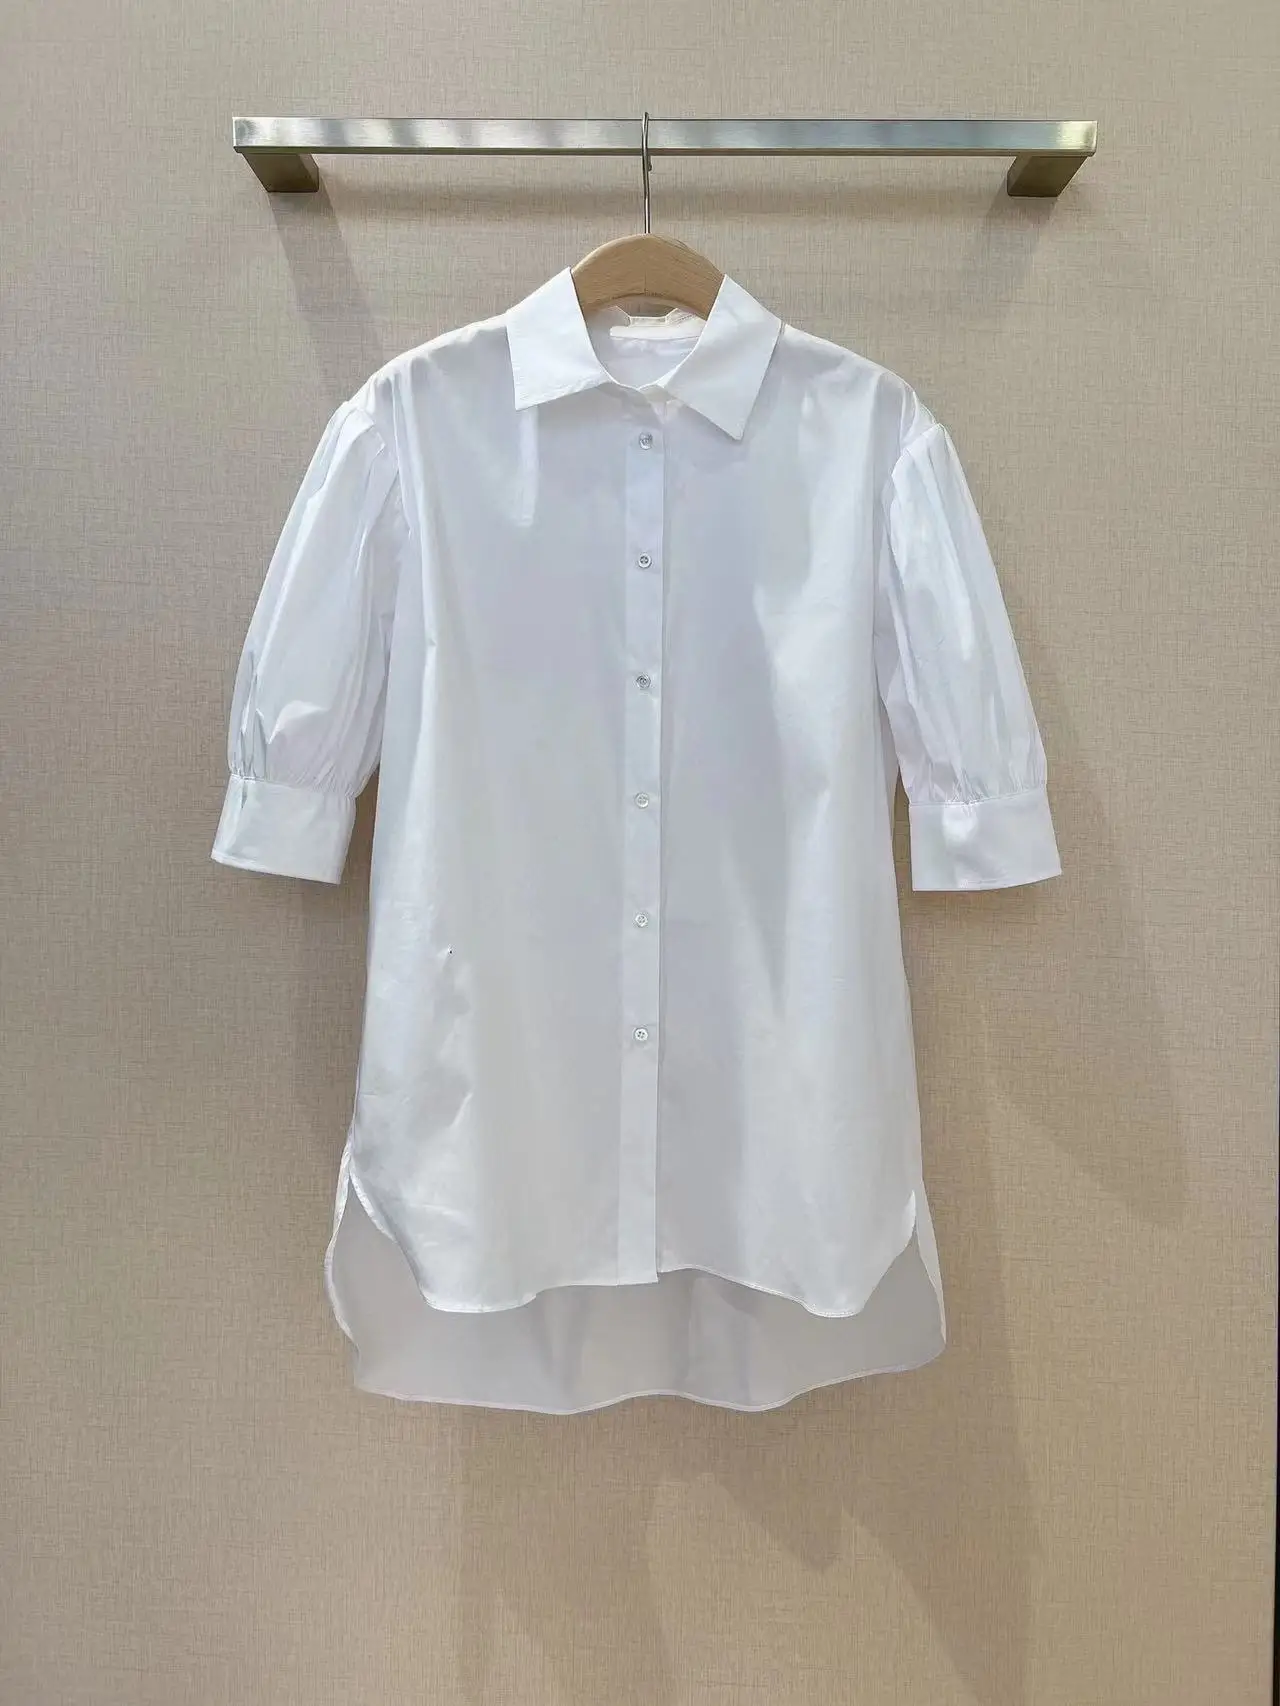 Fyion High Quality Women's Cotton Shirts Solid White Blouse Fashion Runway Vacation Party Summer 2022 Blouse